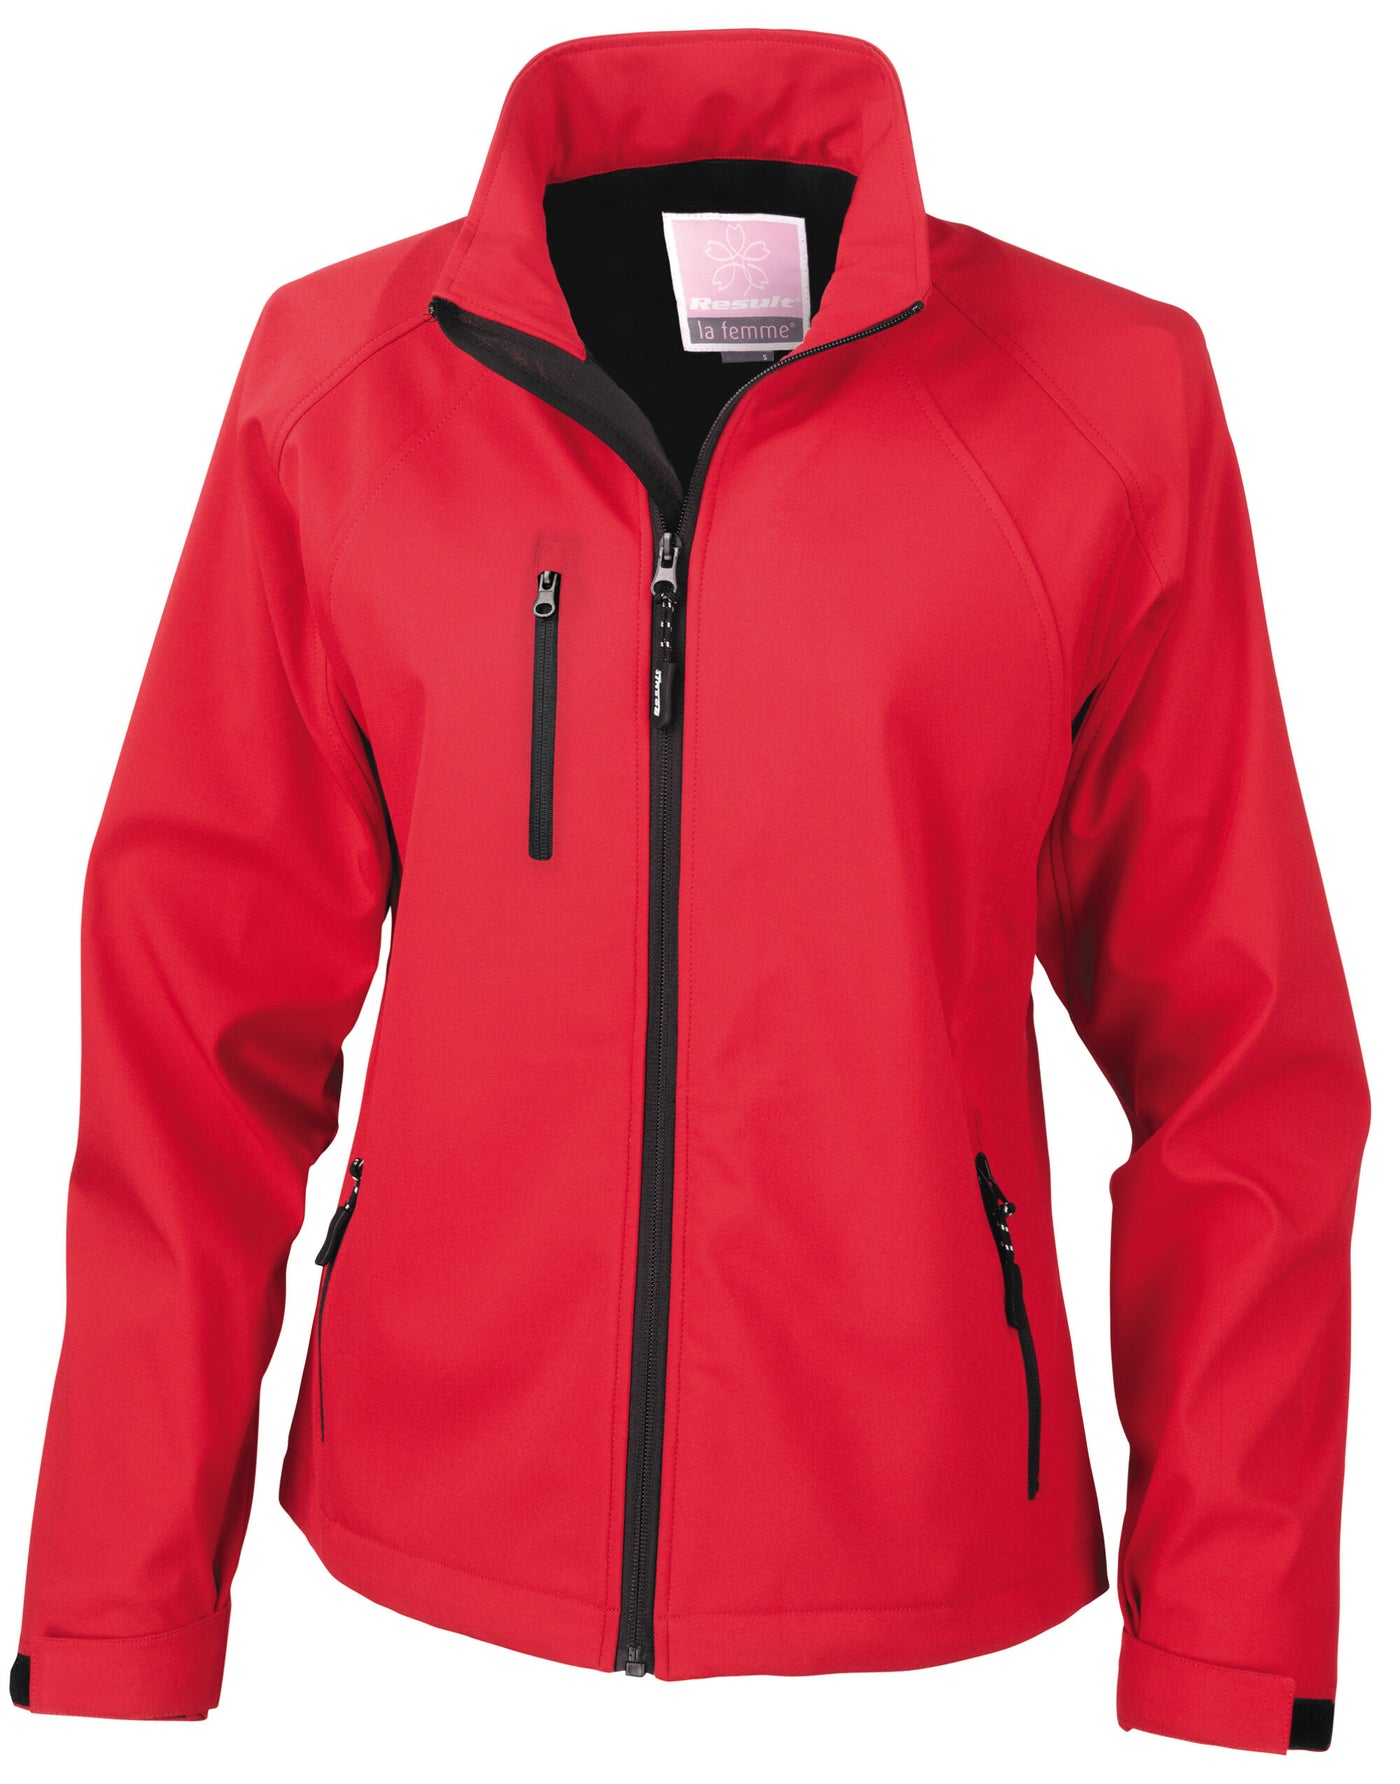 Ladies Soft Shell Jacket in Red